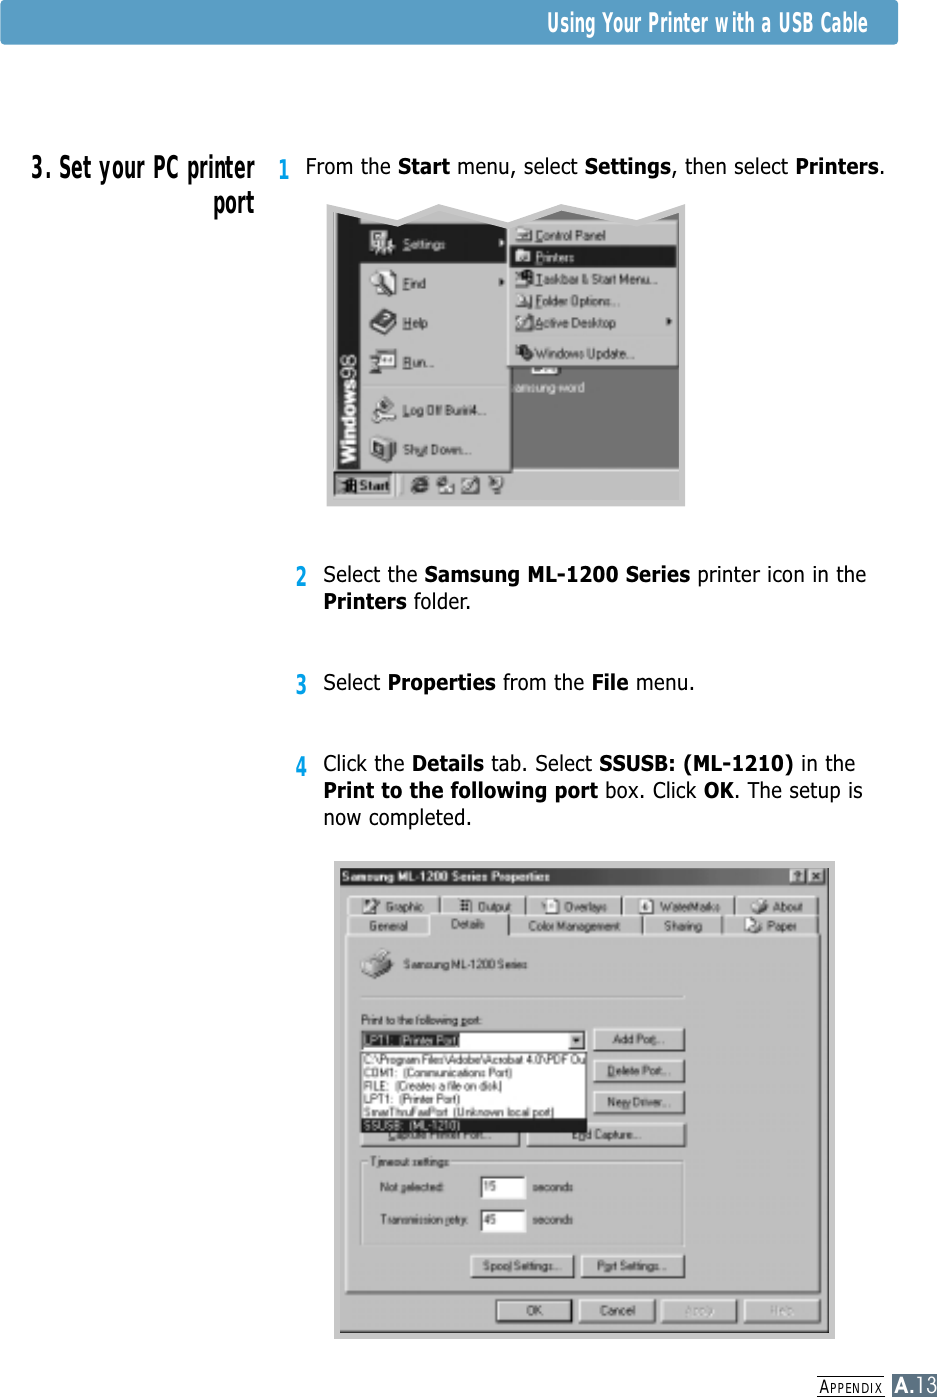 APPENDIXA.13Using Your Printer with a USB Cable1From the Start menu, select Settings, then select Printers.2Select the Samsung ML-1200 Series printer icon in thePrinters folder.3Select Properties from the File menu.4Click the Details tab. Select SSUSB: (ML-1210) in thePrint to the following port box. Click OK. The setup isnow completed.3. Set your PC printerport